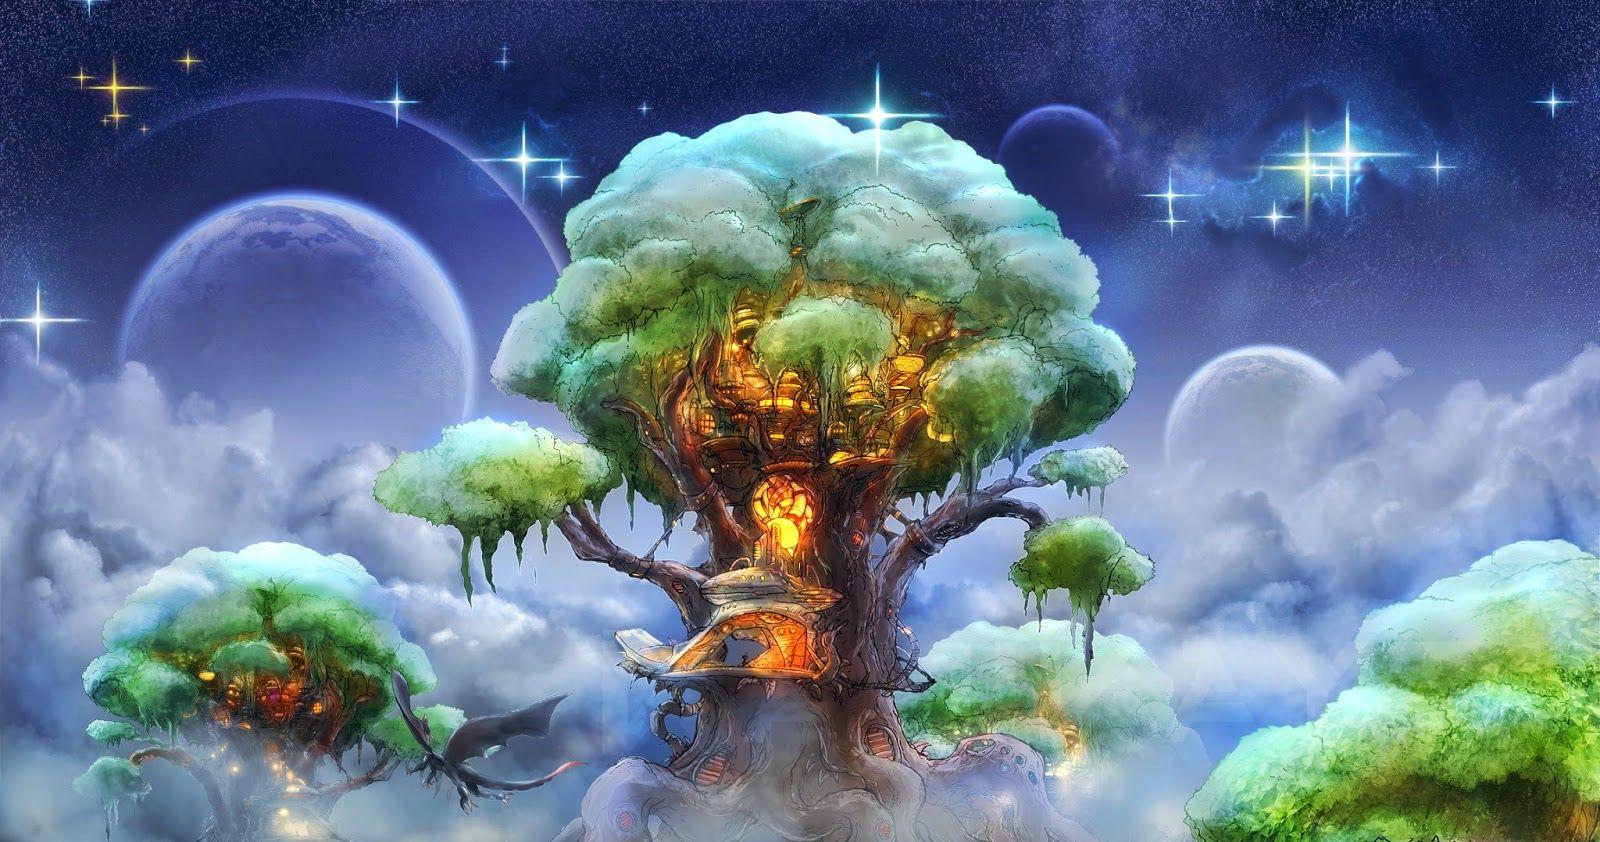 Kids Tree House
 Wallpapers